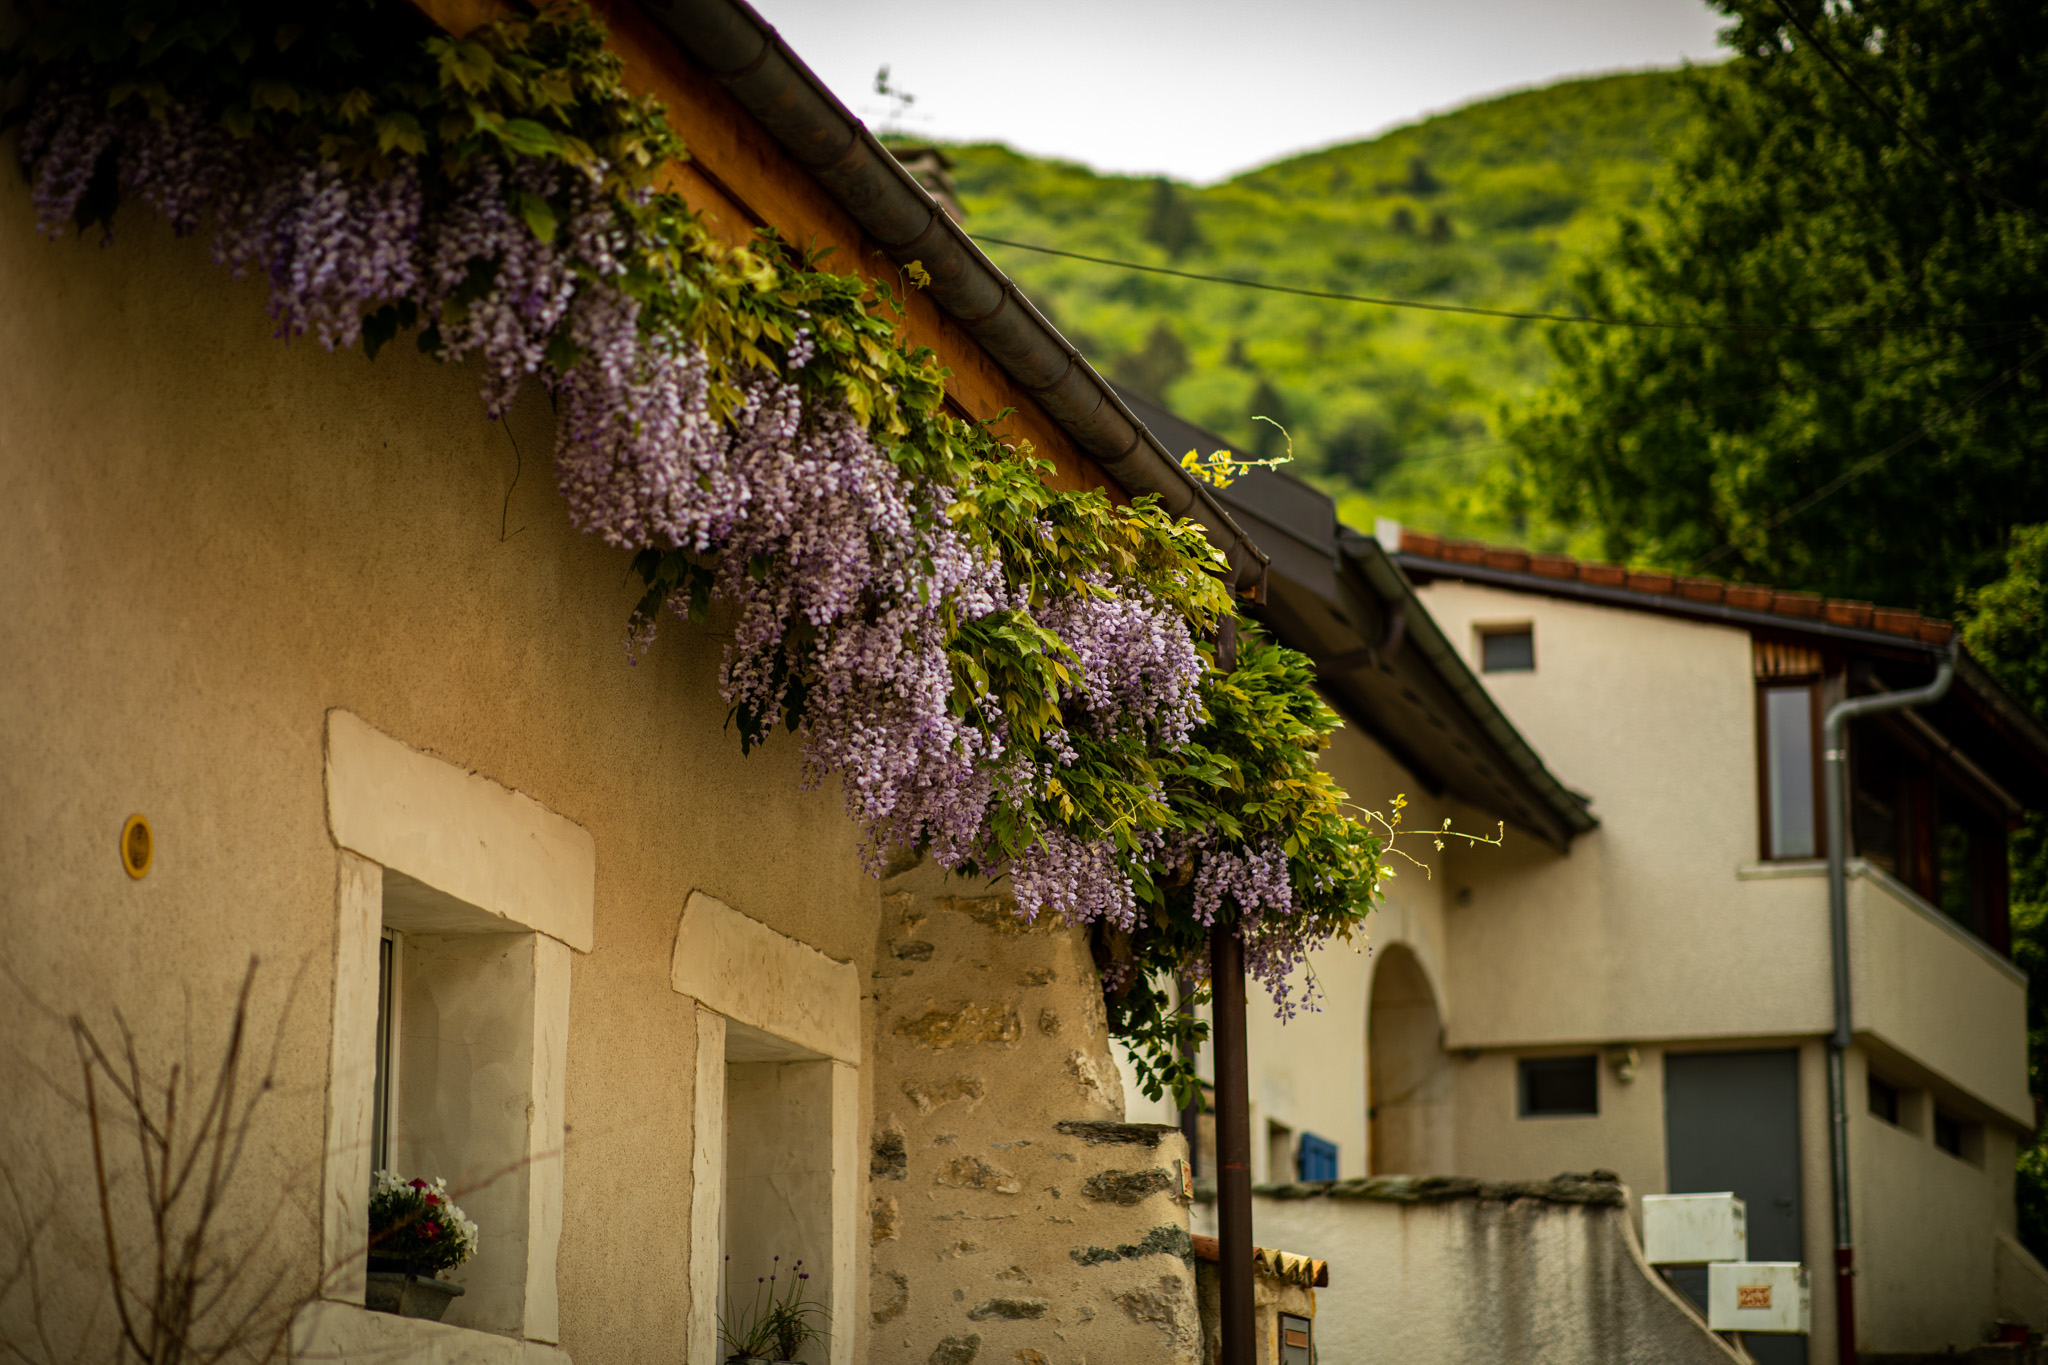 General 2048x1365 photography outdoors trees flowers building village architecture